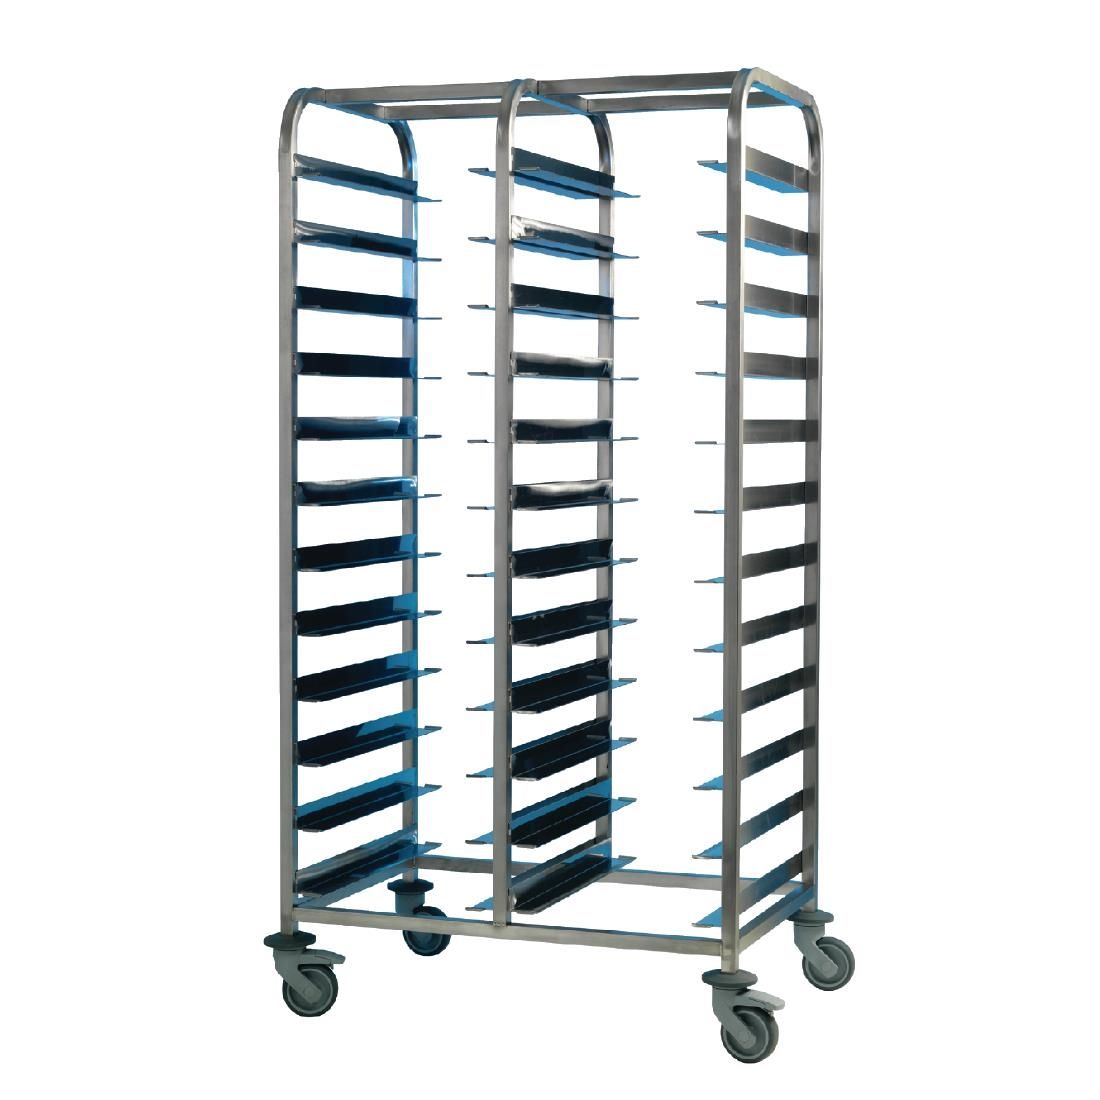 DP293 EAIS Stainless Steel Clearing Trolley 24 Shelves JD Catering Equipment Solutions Ltd